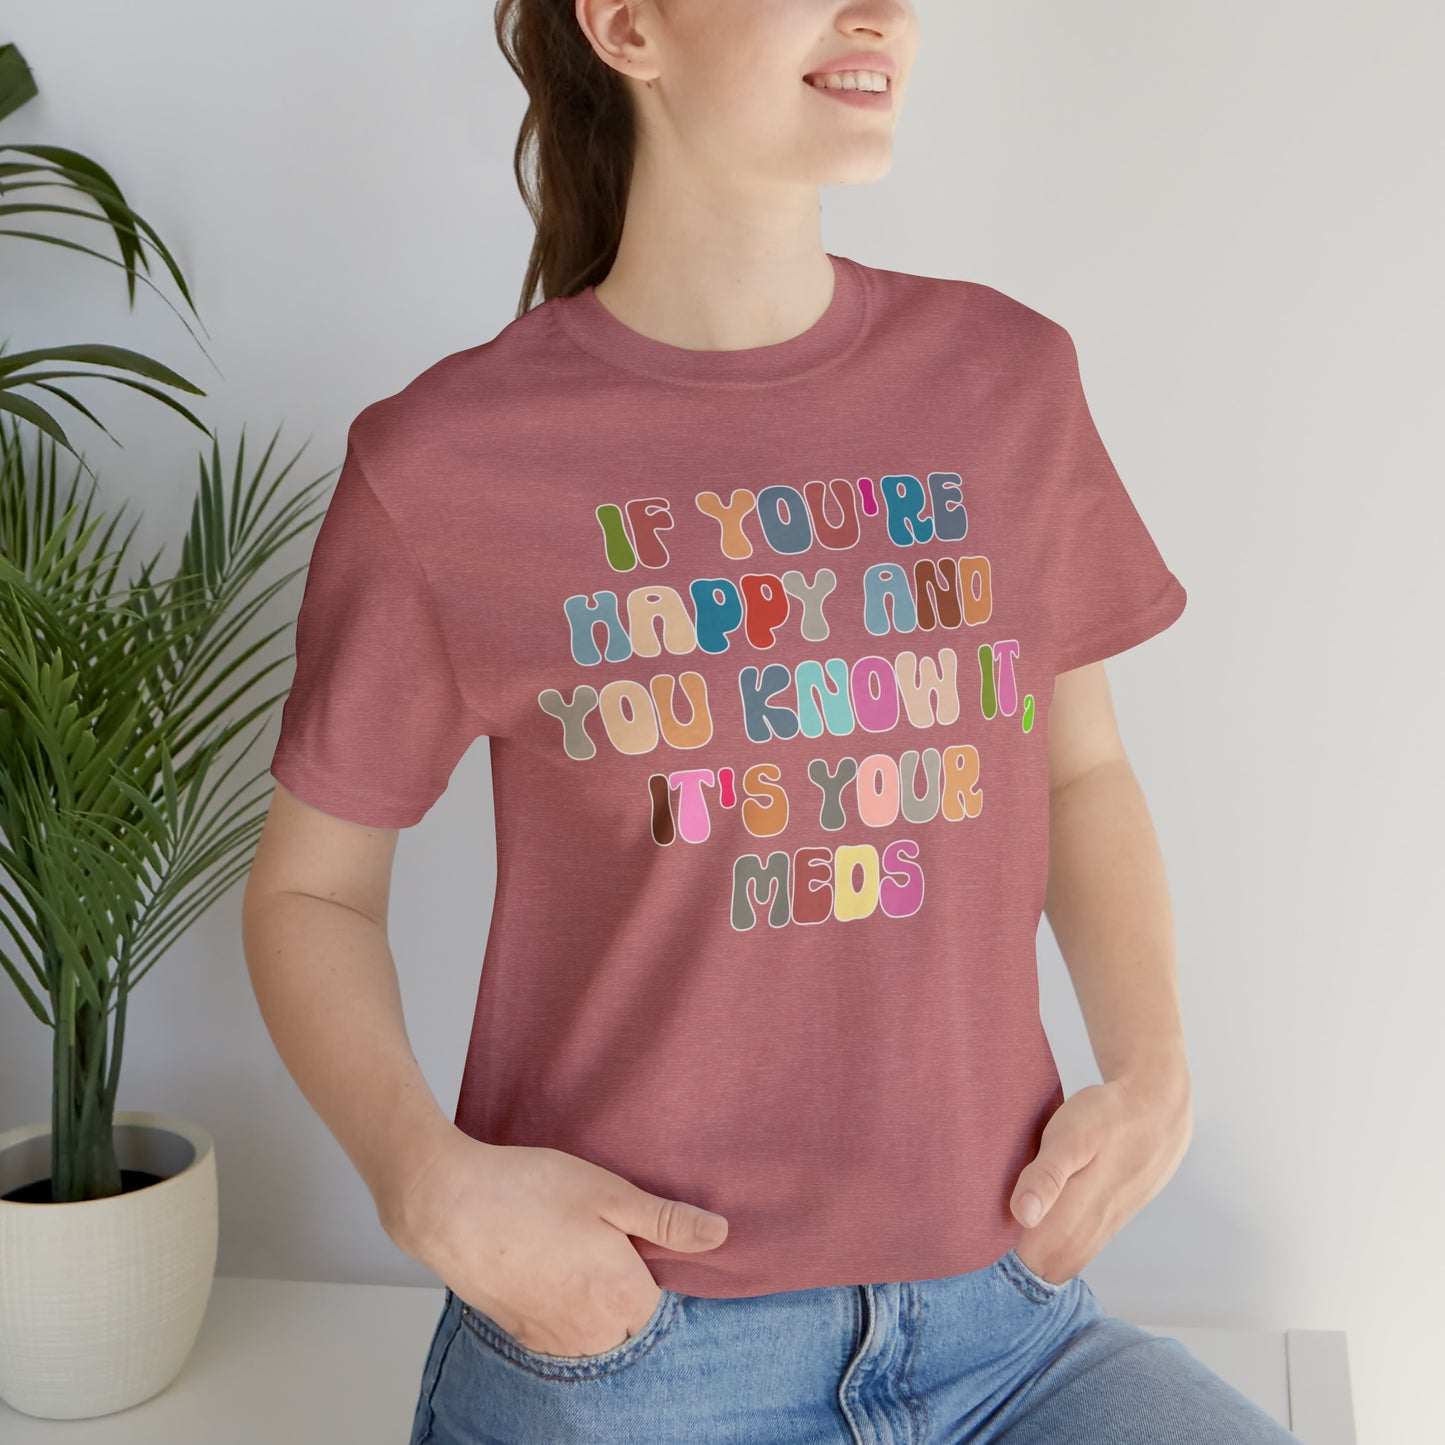 Funny Doctor Shirt, Pharmacist Shirt, If You're Happy and You Know it, It's Your Meds Shirt, T388